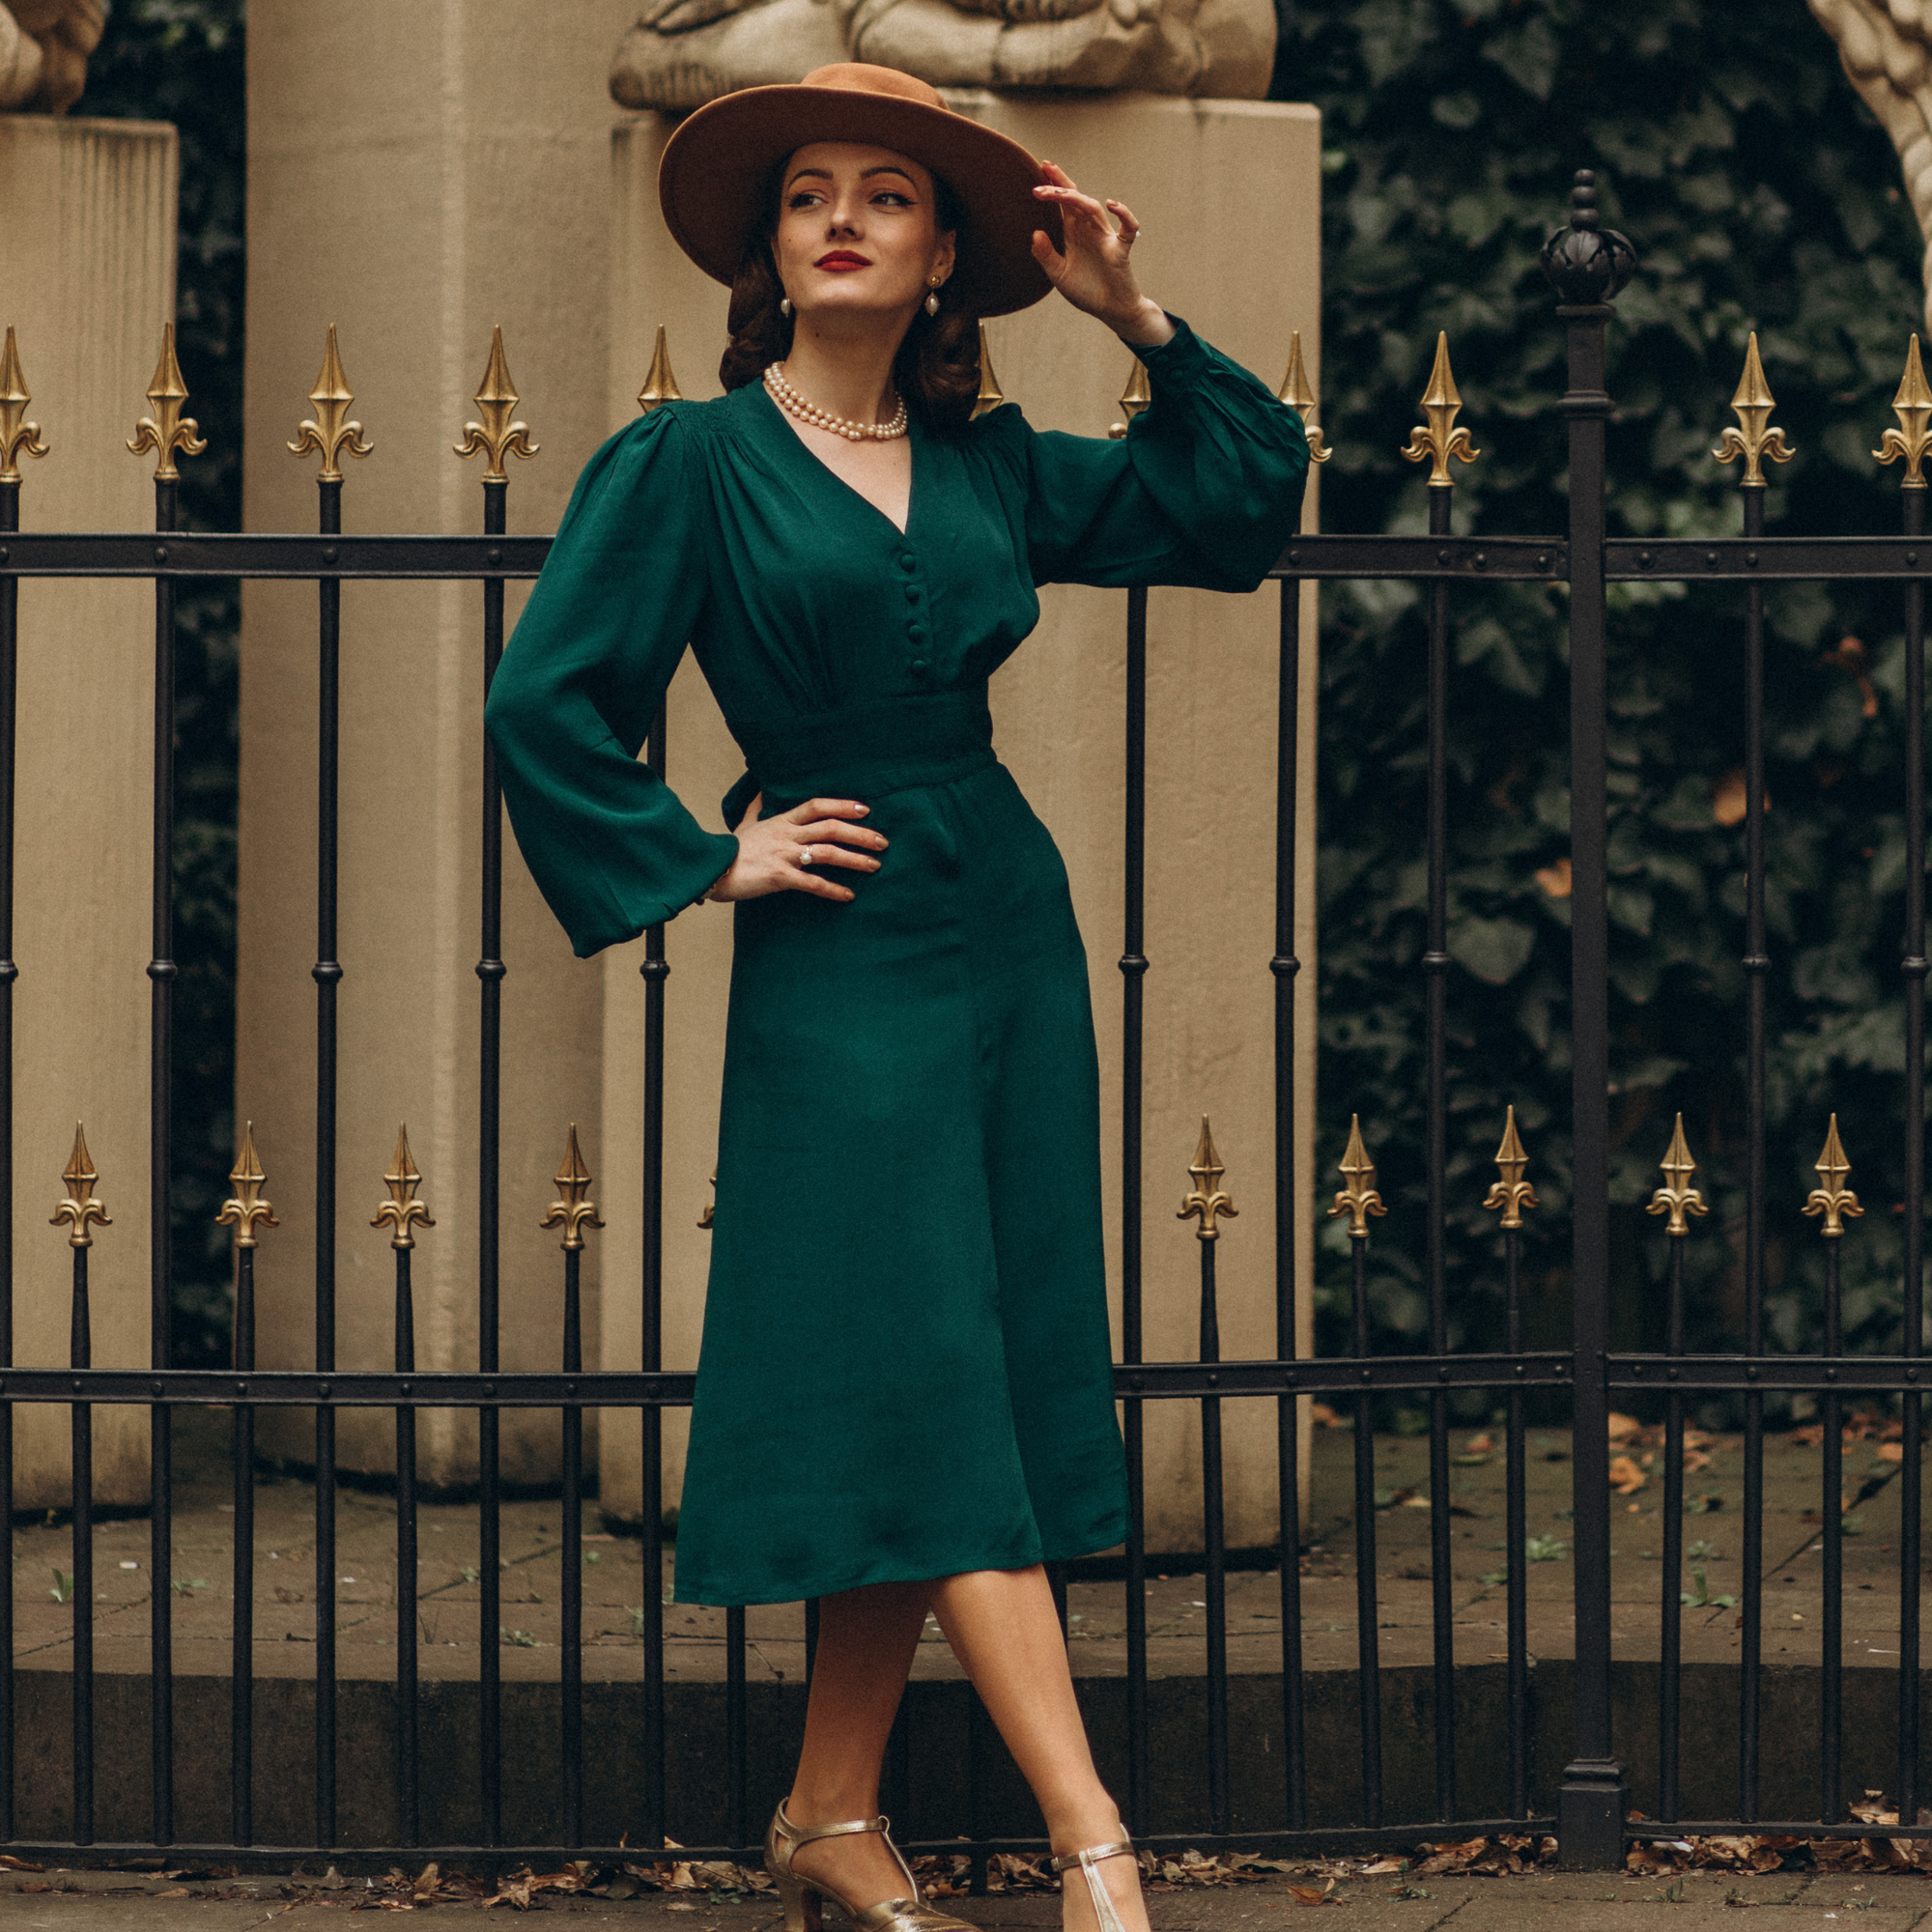 Ava Dress | Vintage 1940s Style Dress - The Seamstress of Bloomsbury